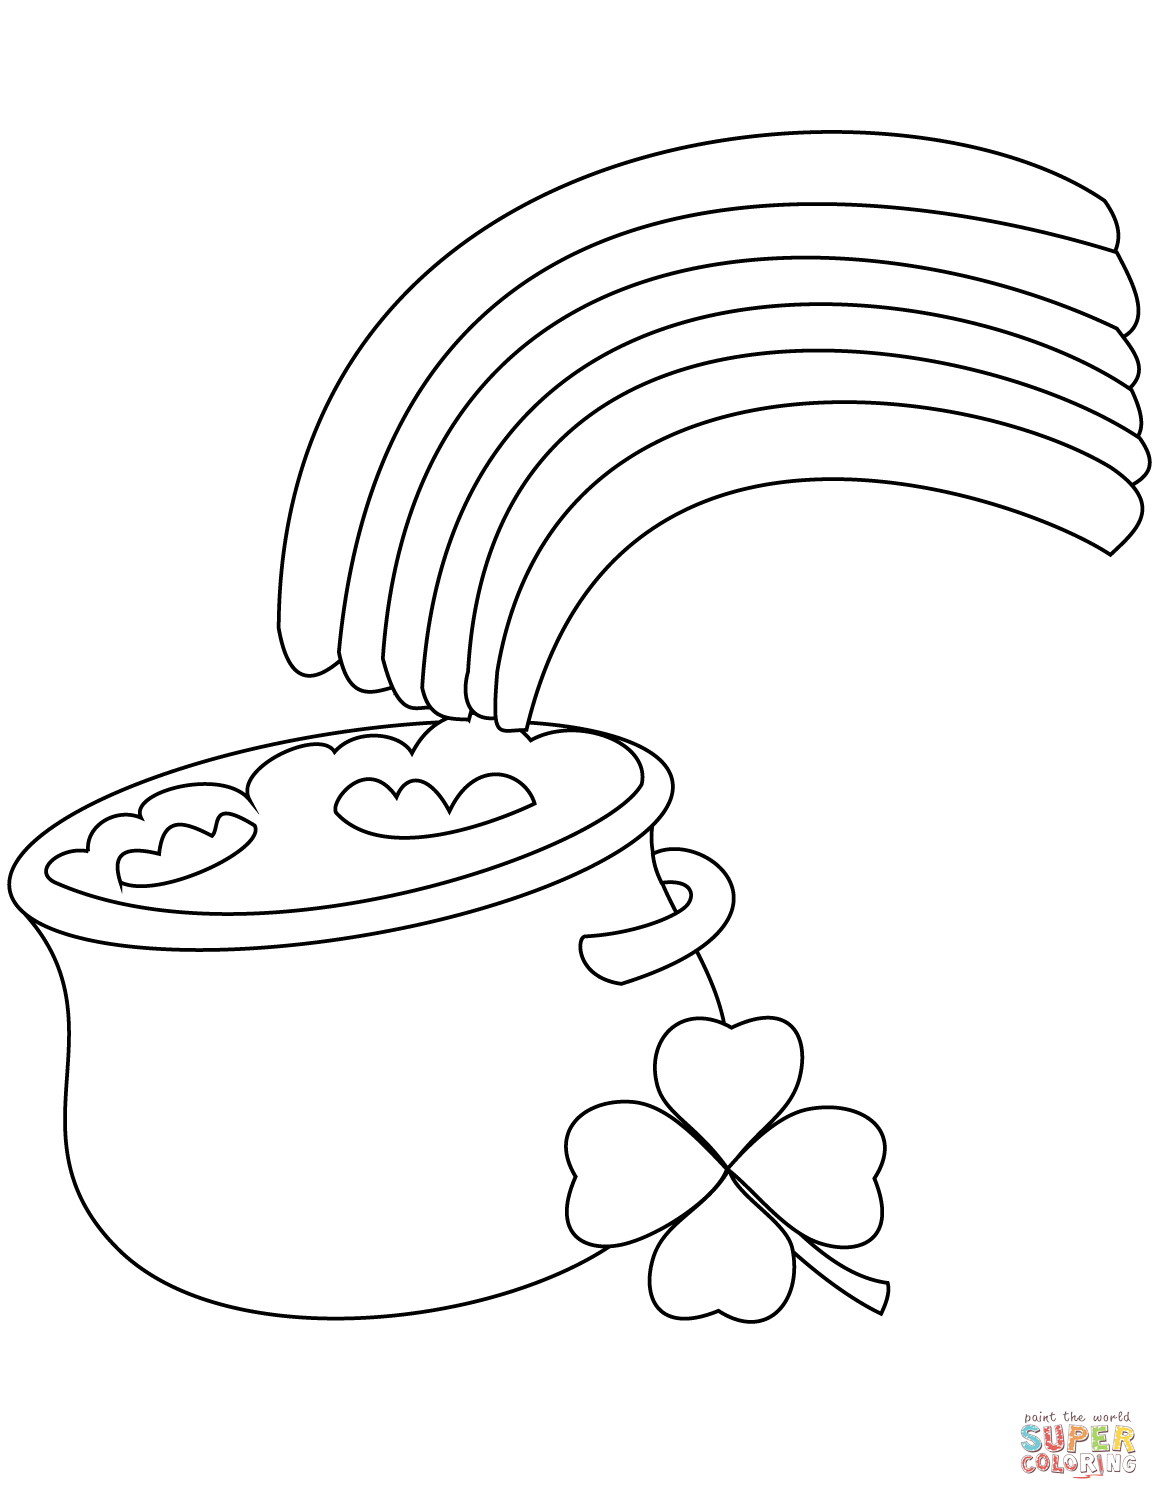 Rainbow and pot of gold coloring page free printable coloring pages